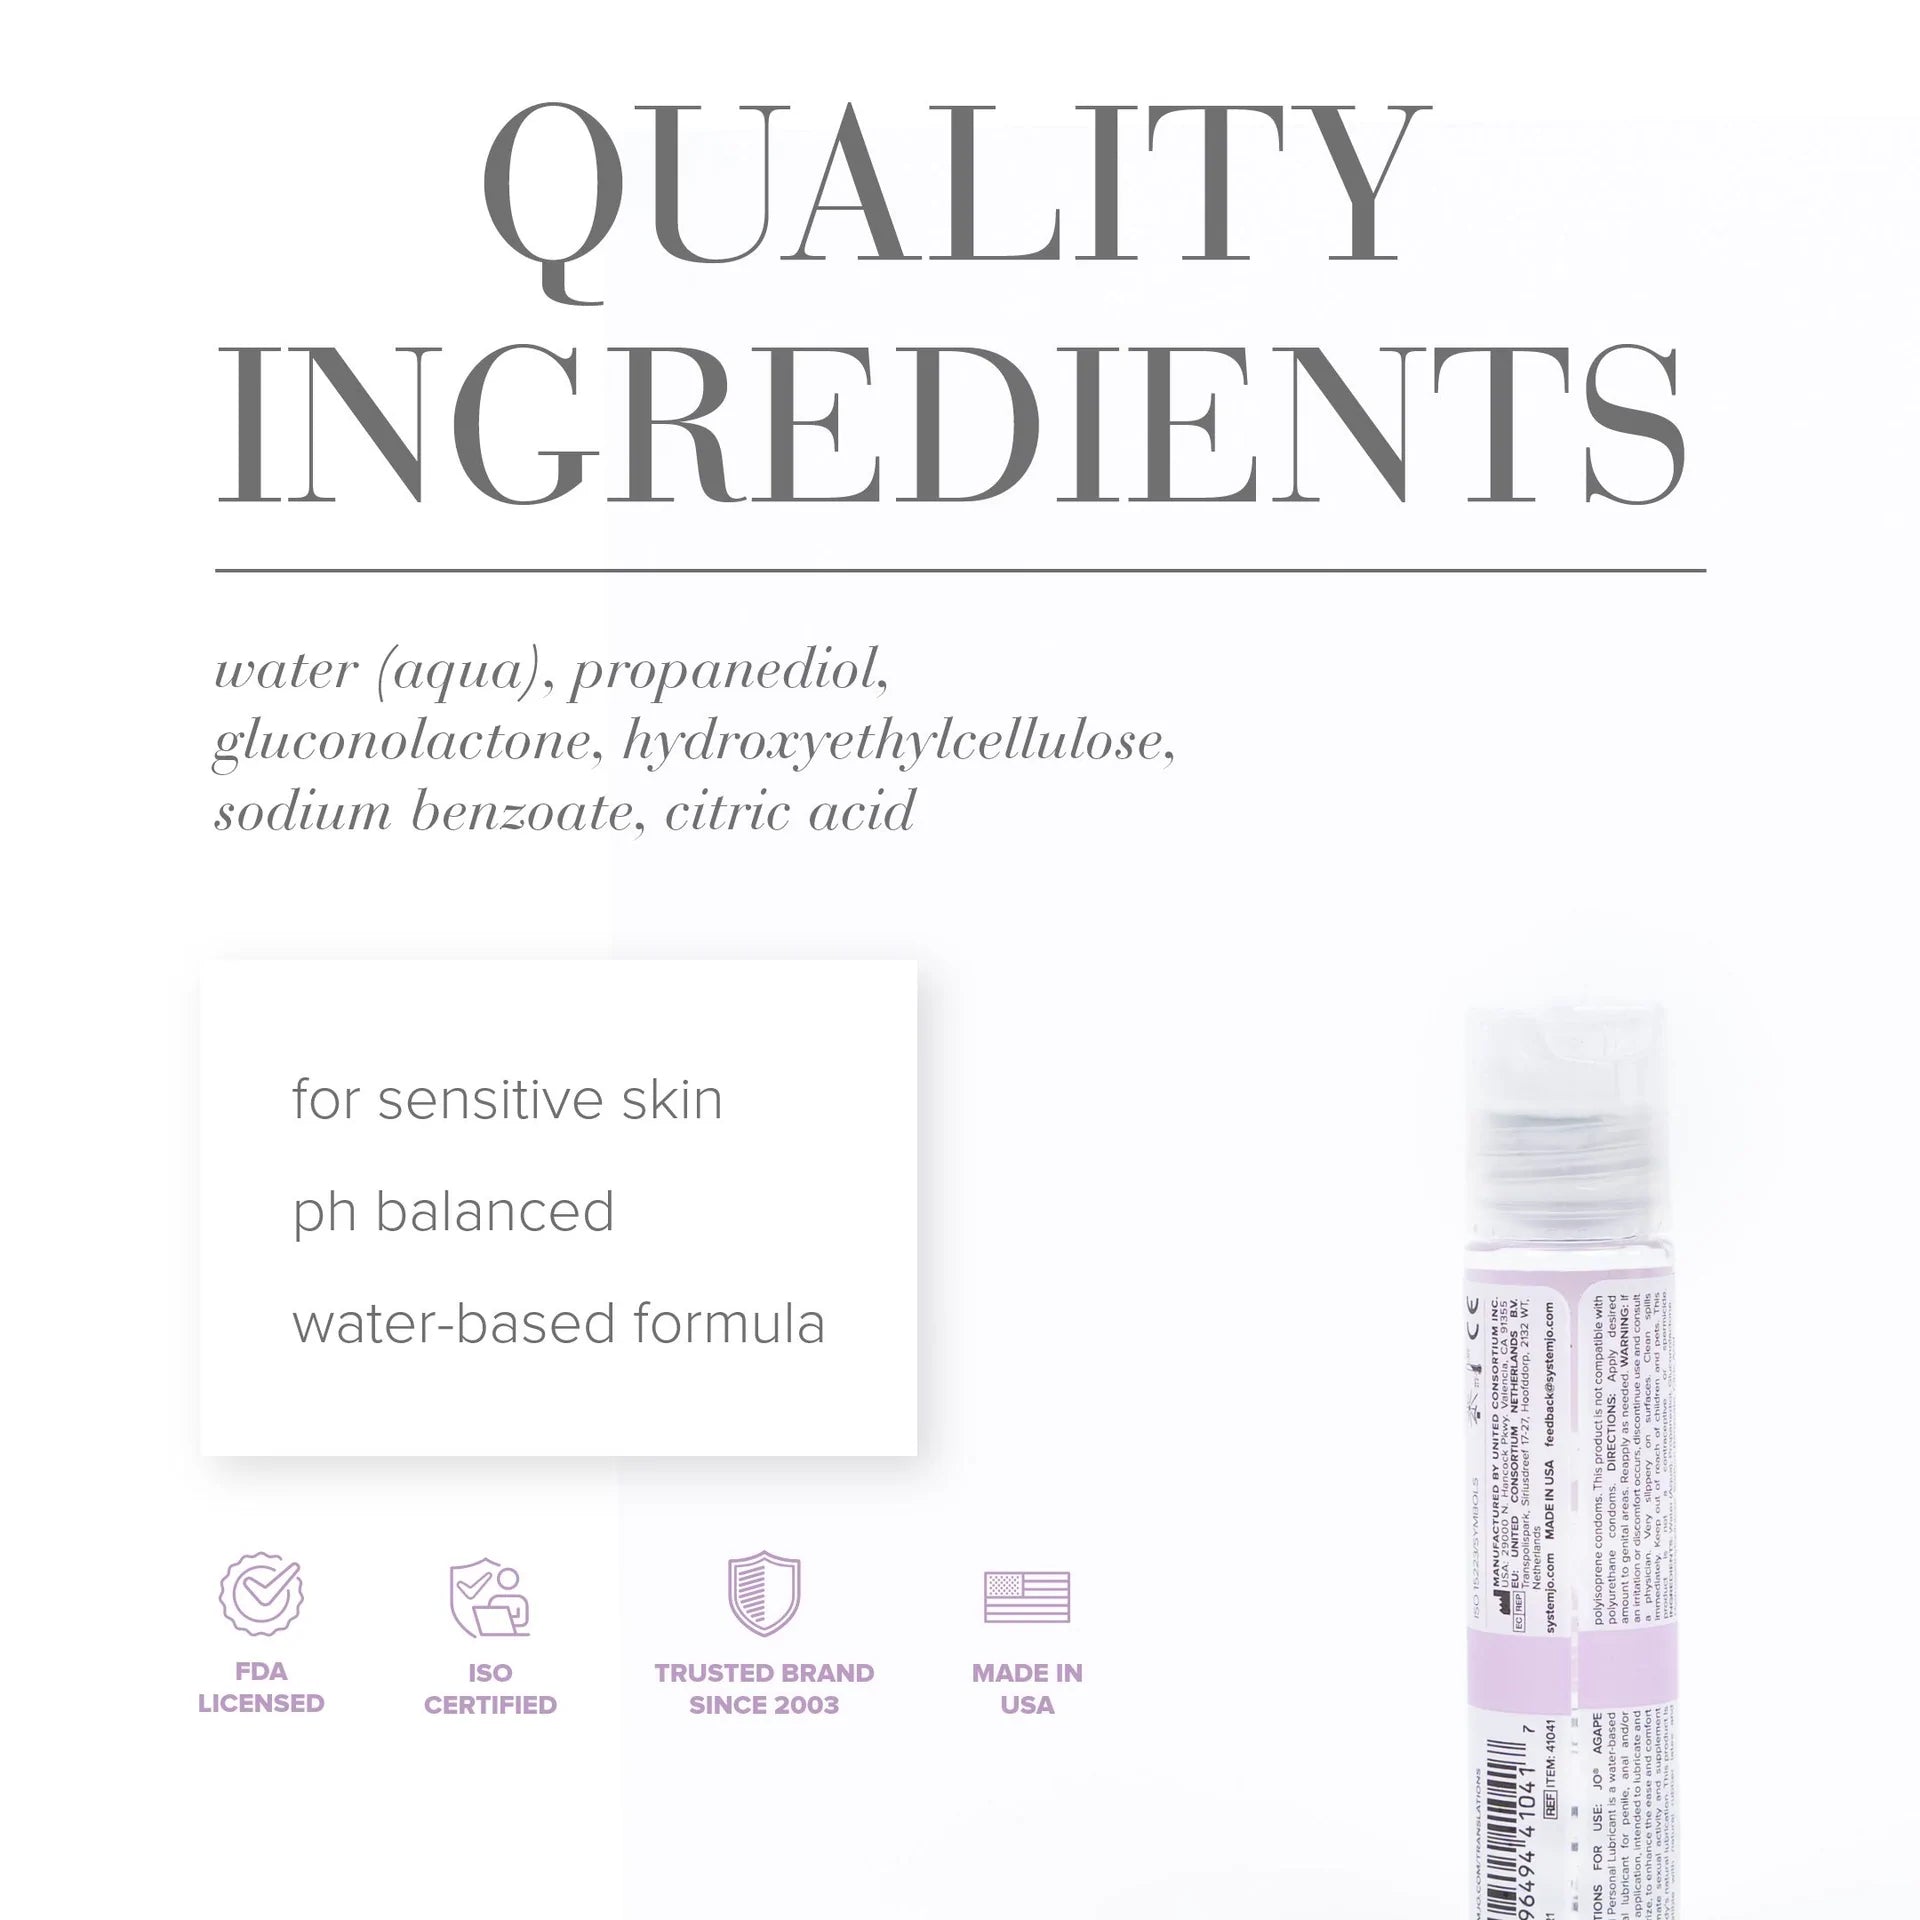 Quality Ingredients: water (aqua), propanediol, gluconolactone, hydroxyethylcellulose, sodium benzoate, citric acid. For sensitive skin, ph balanced, water-based formula, FDA licensed, ISO certified, trusted brand since 2003, made in USA.